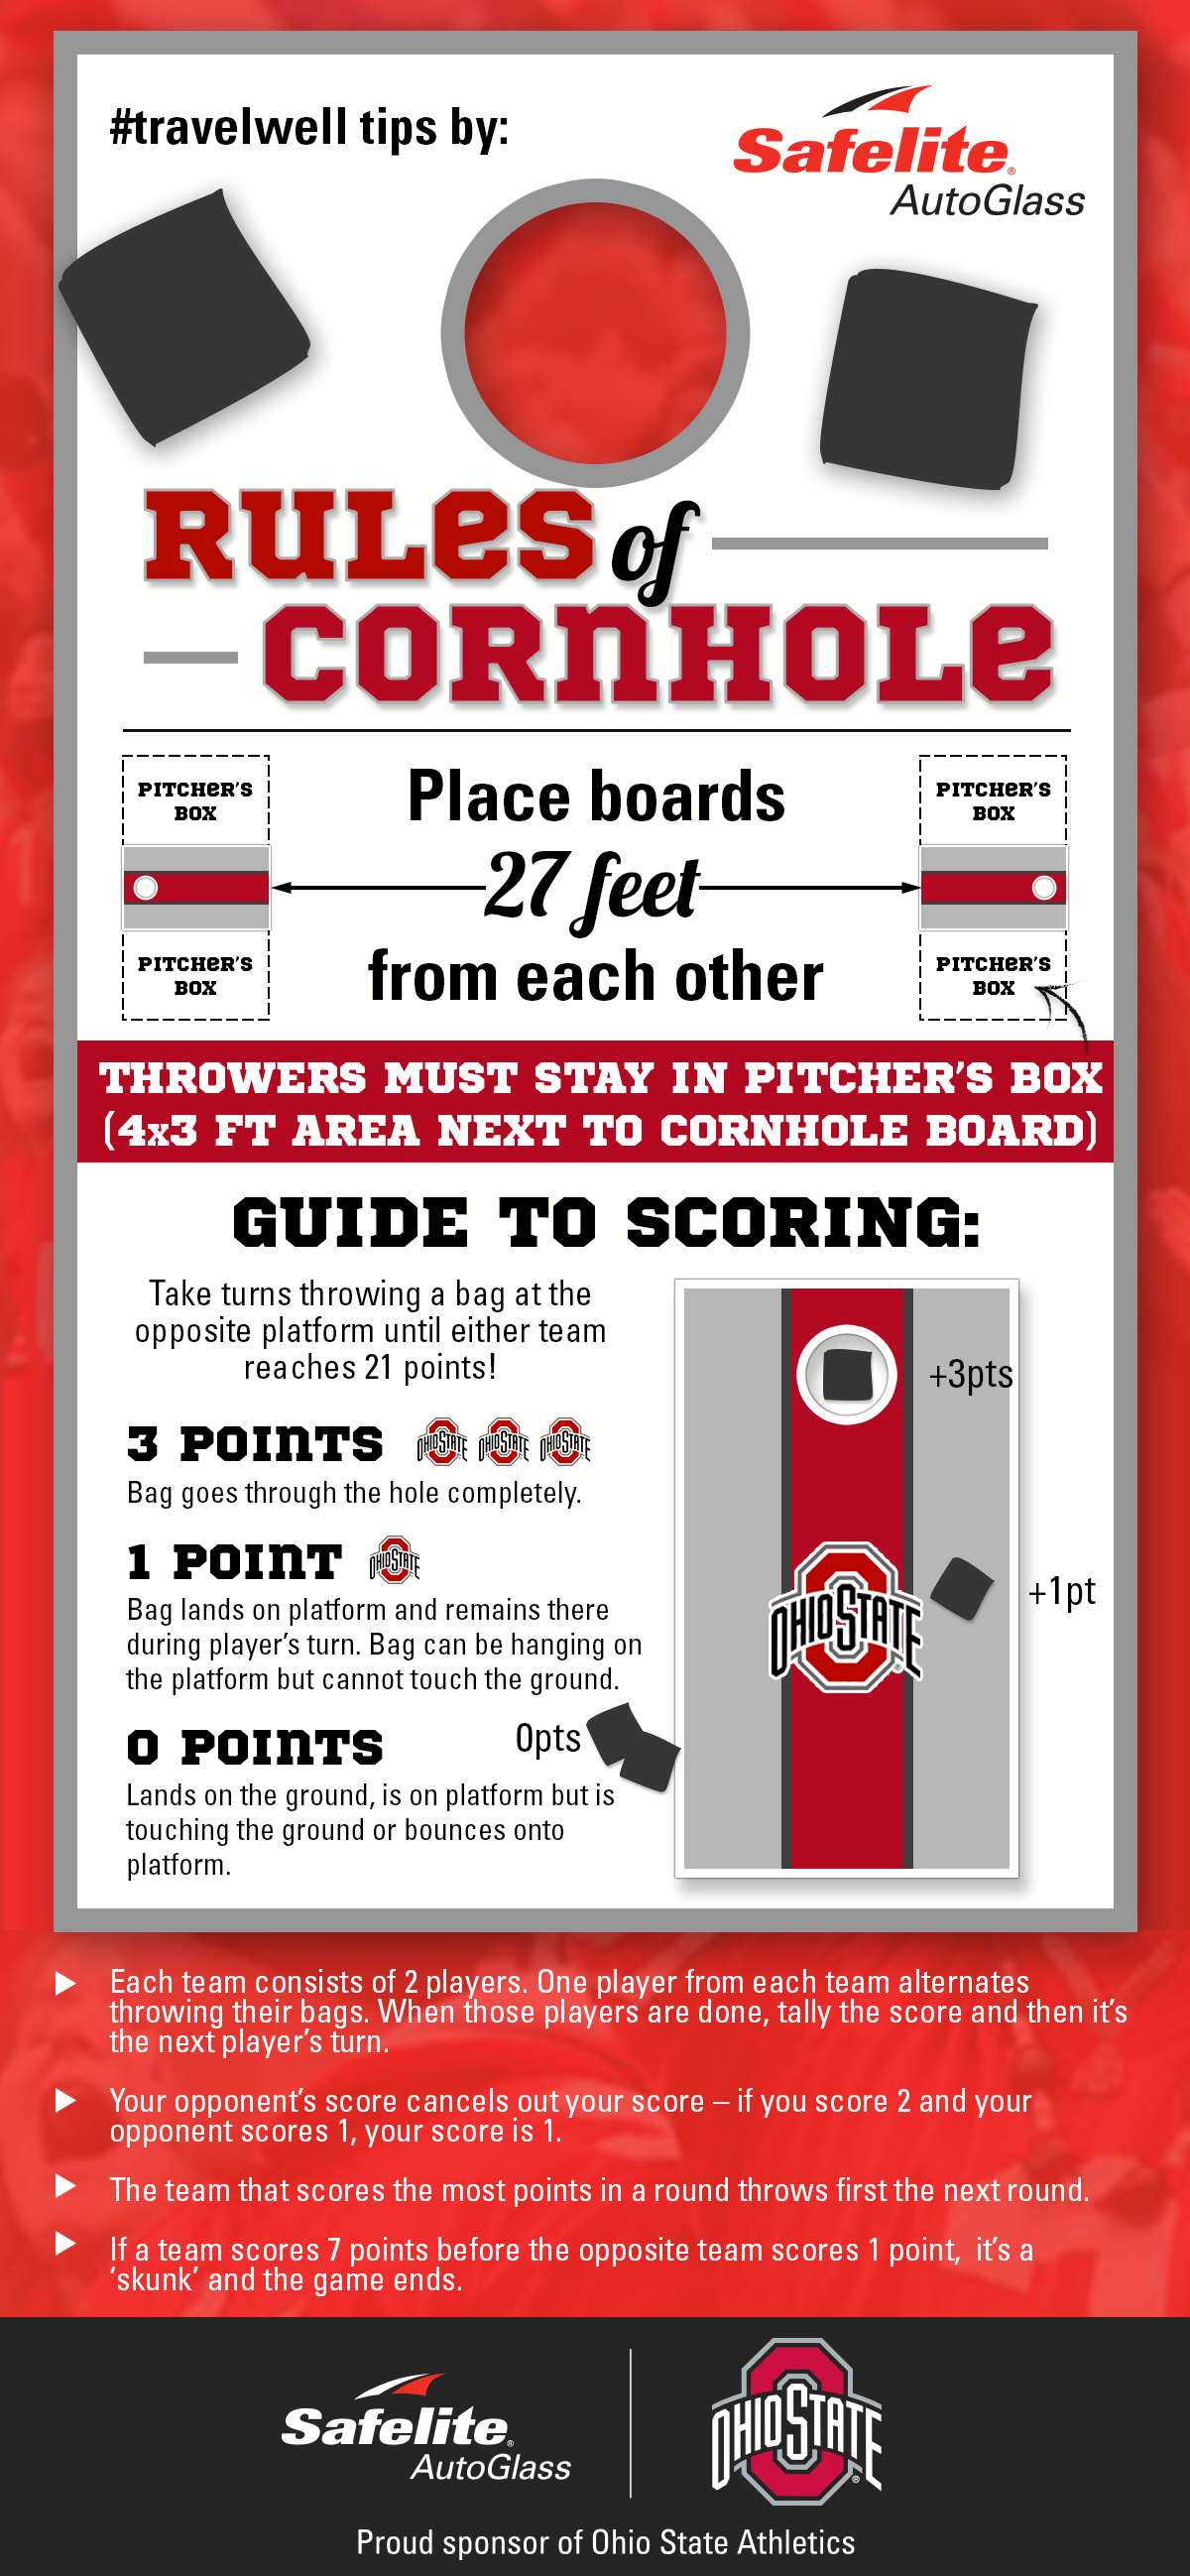 Safelite shares all the rules of cornhole so you're set for your next tailgate!